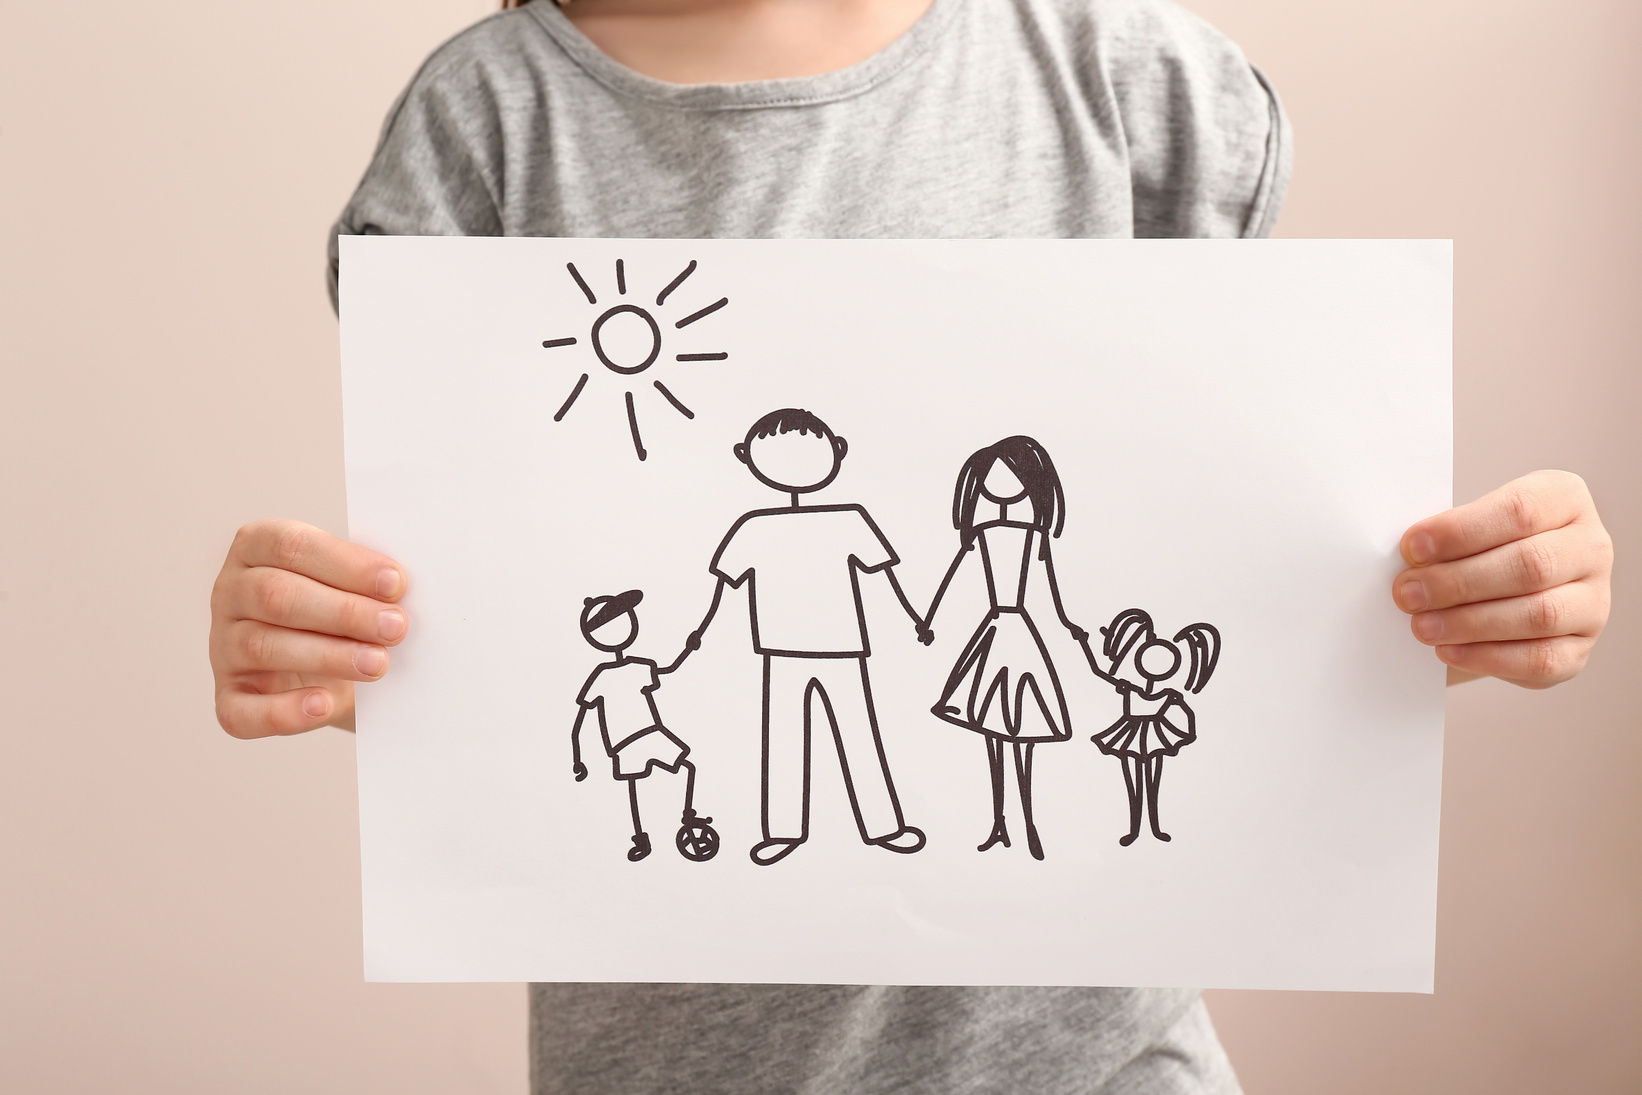 Child with Drawing of Family. Concept of Adoption